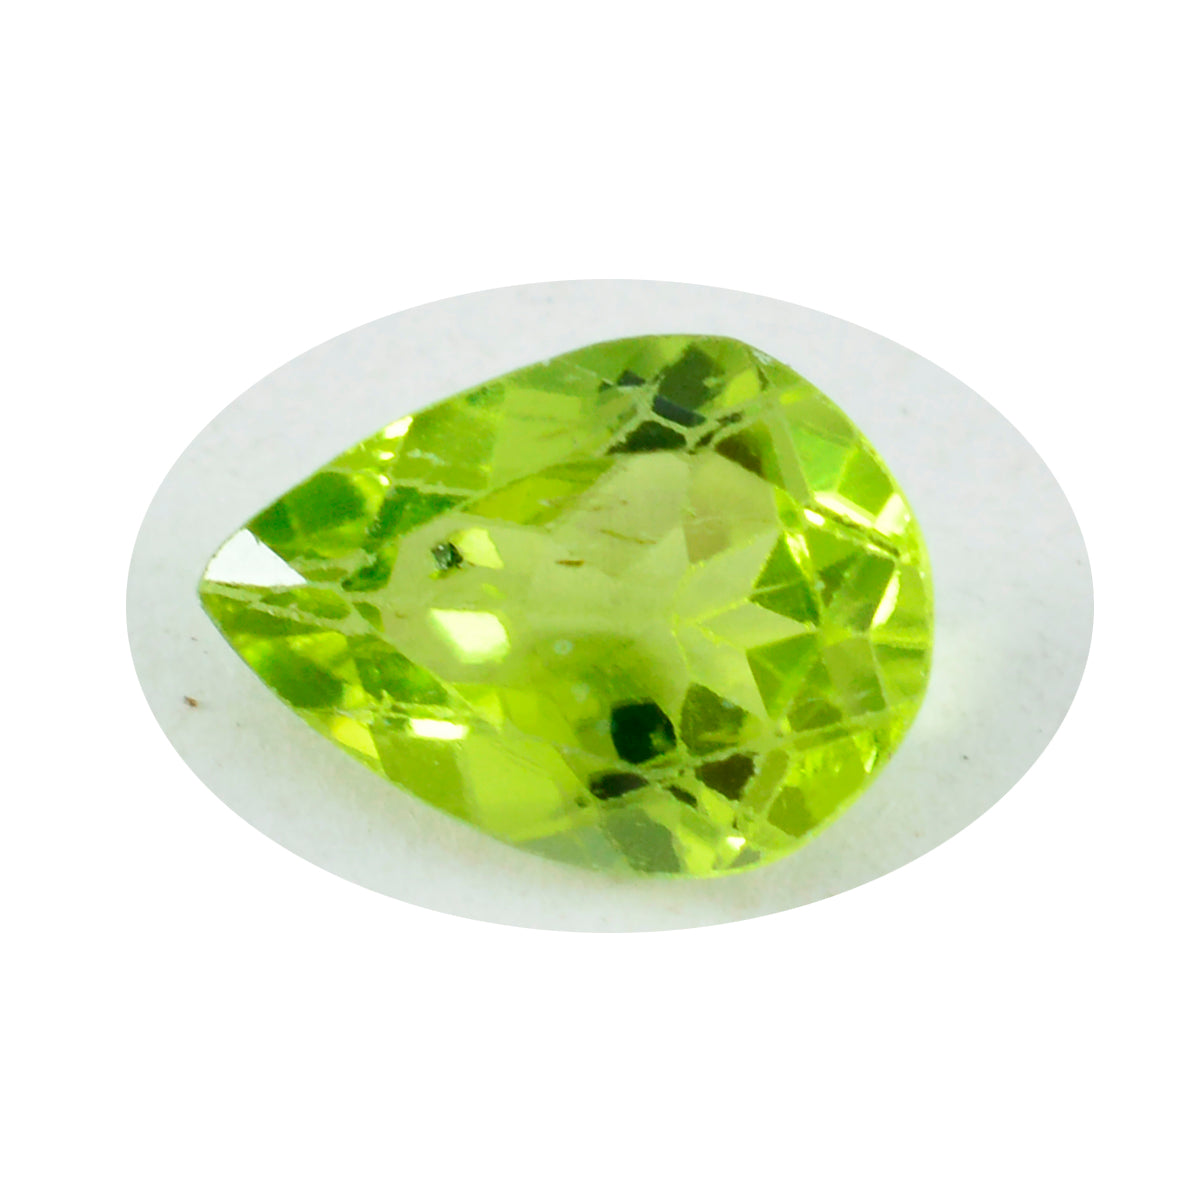 Riyogems 1PC Genuine Green Peridot Faceted 12x16 mm Pear Shape awesome Quality Loose Stone